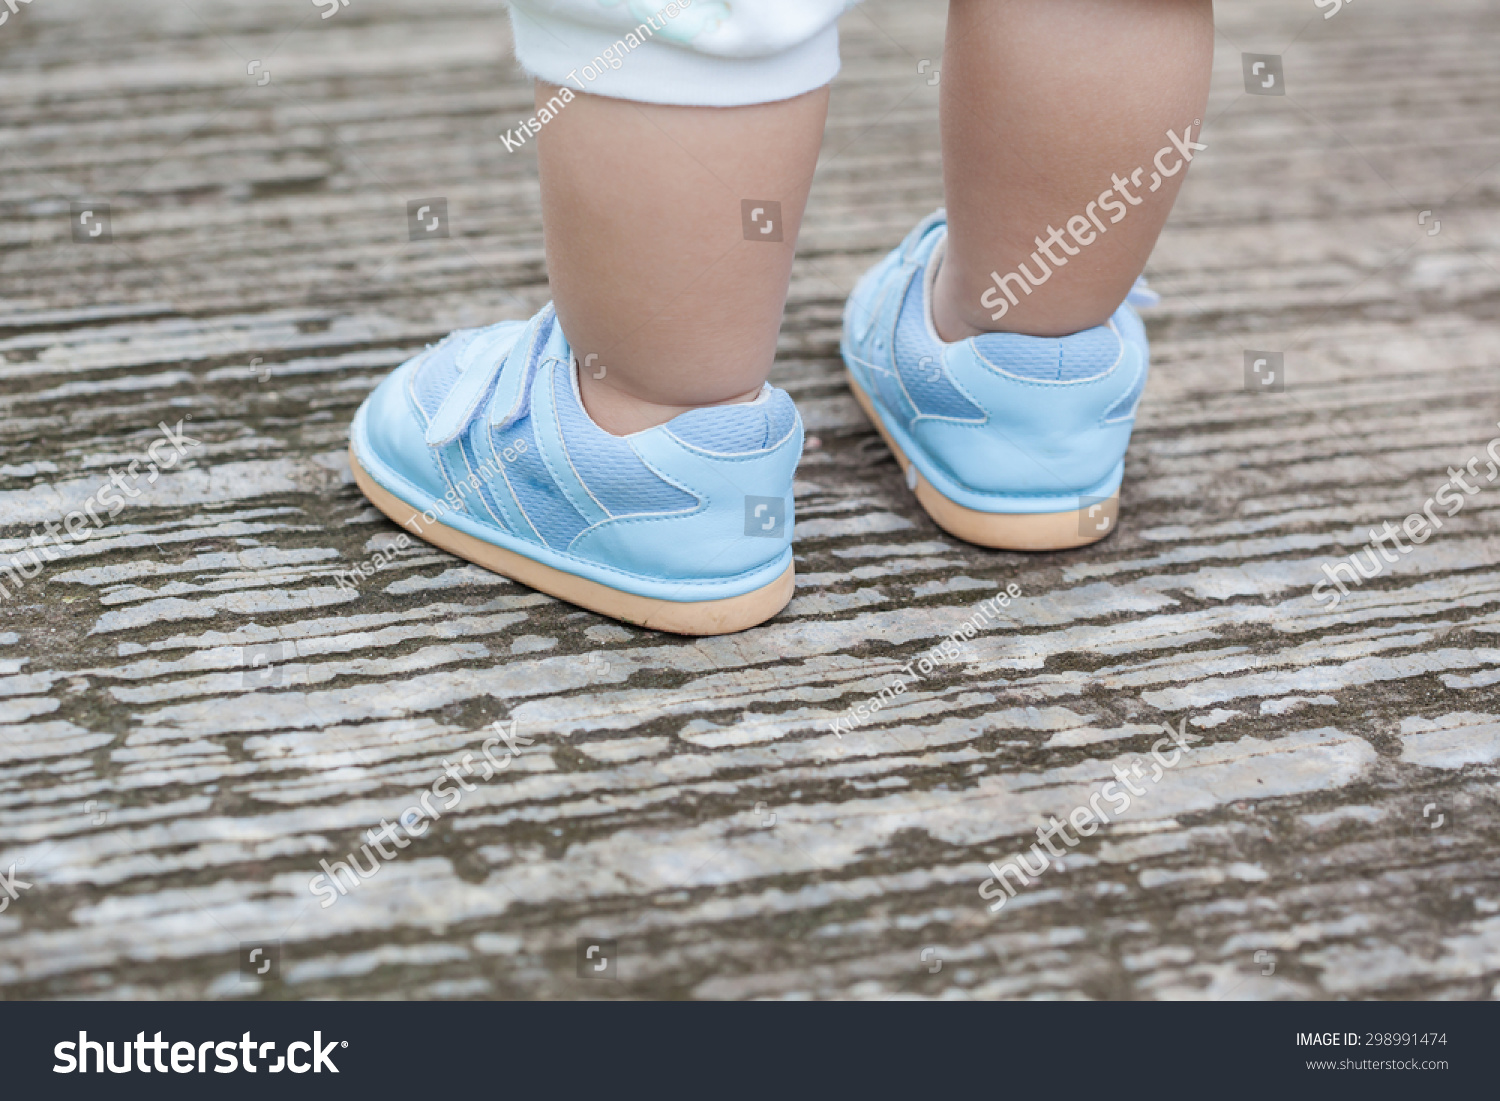 Shoes baby soft focus background. #298991474